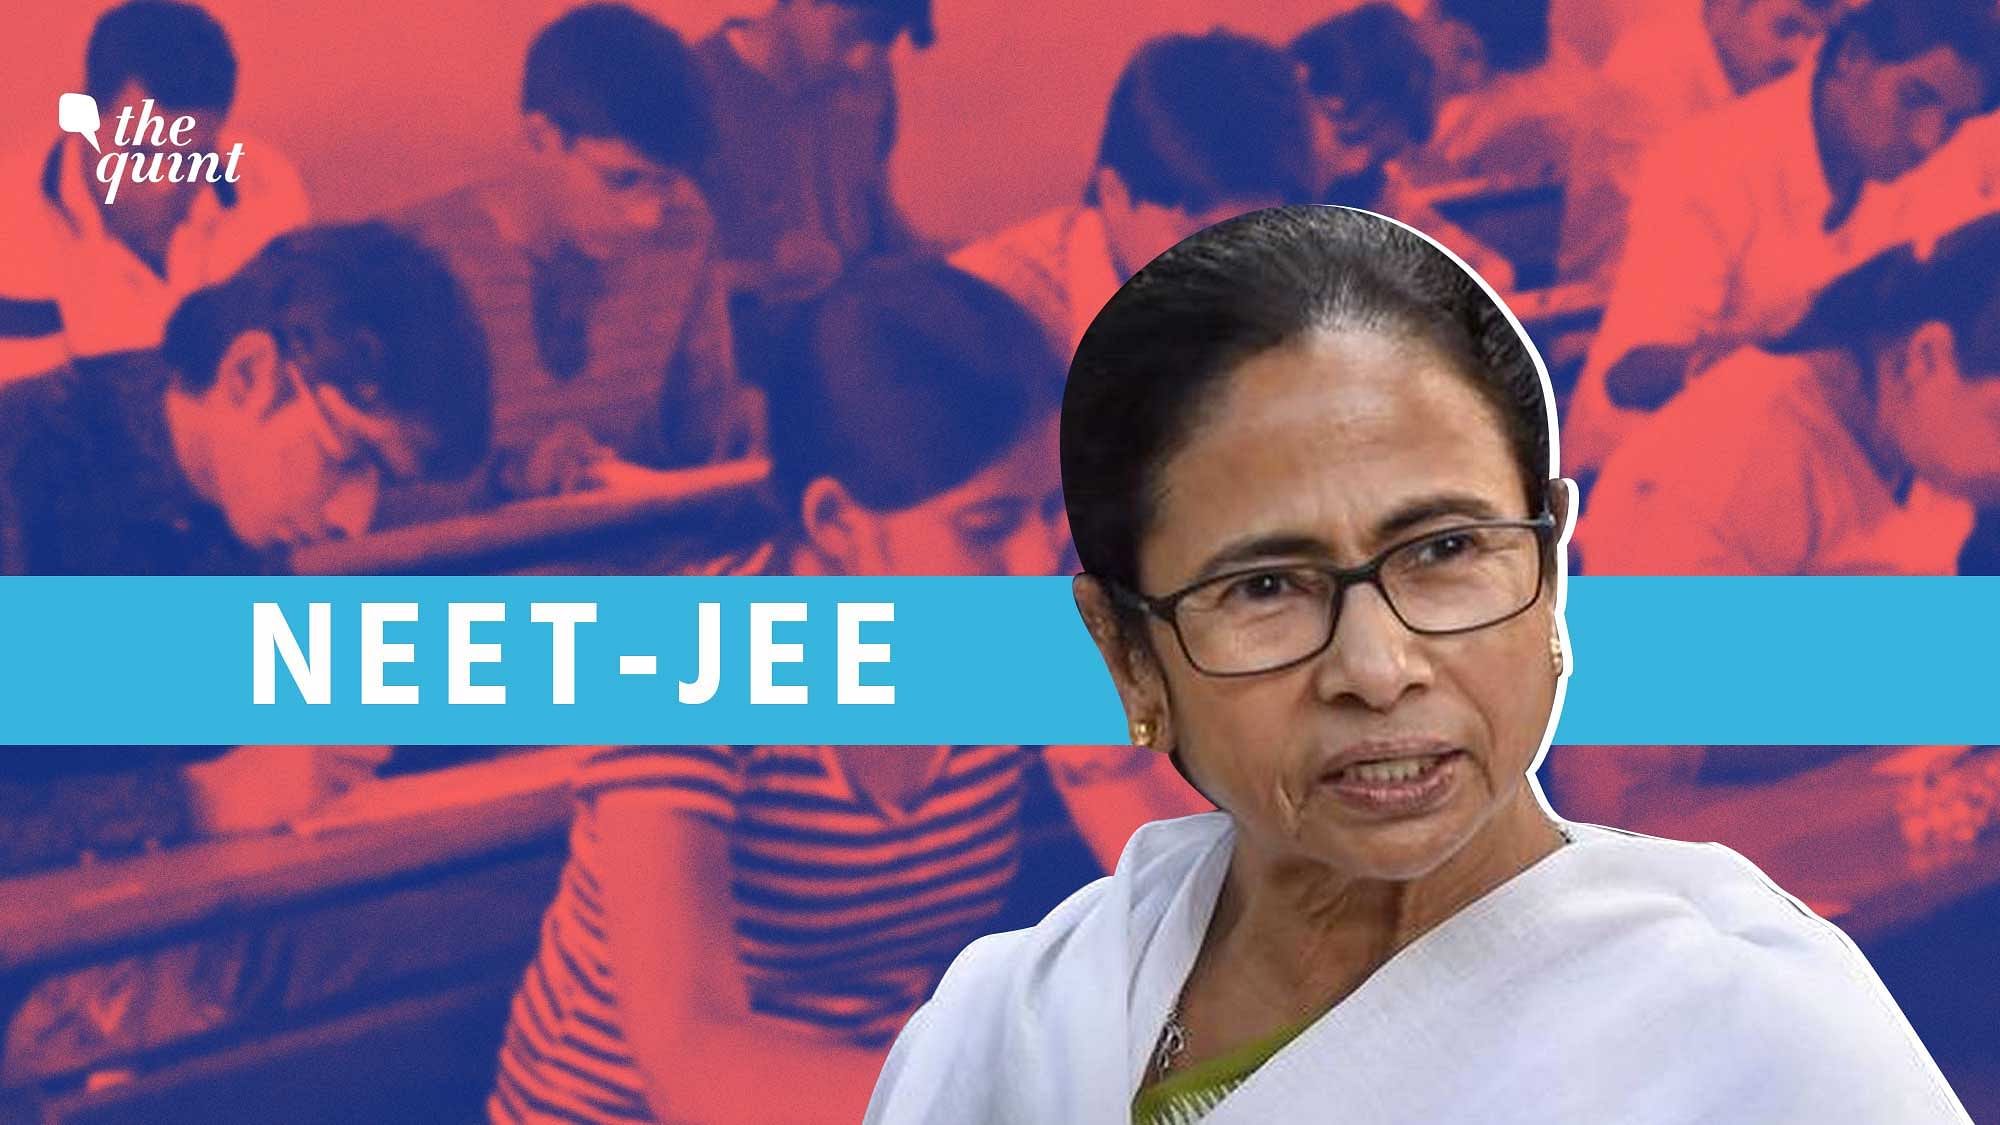 JEE Mains 2020 Exam: According to the CM, despite state efforts, only 1,167 students were able to appear for the JEE exam on Tuesday, 1 September.